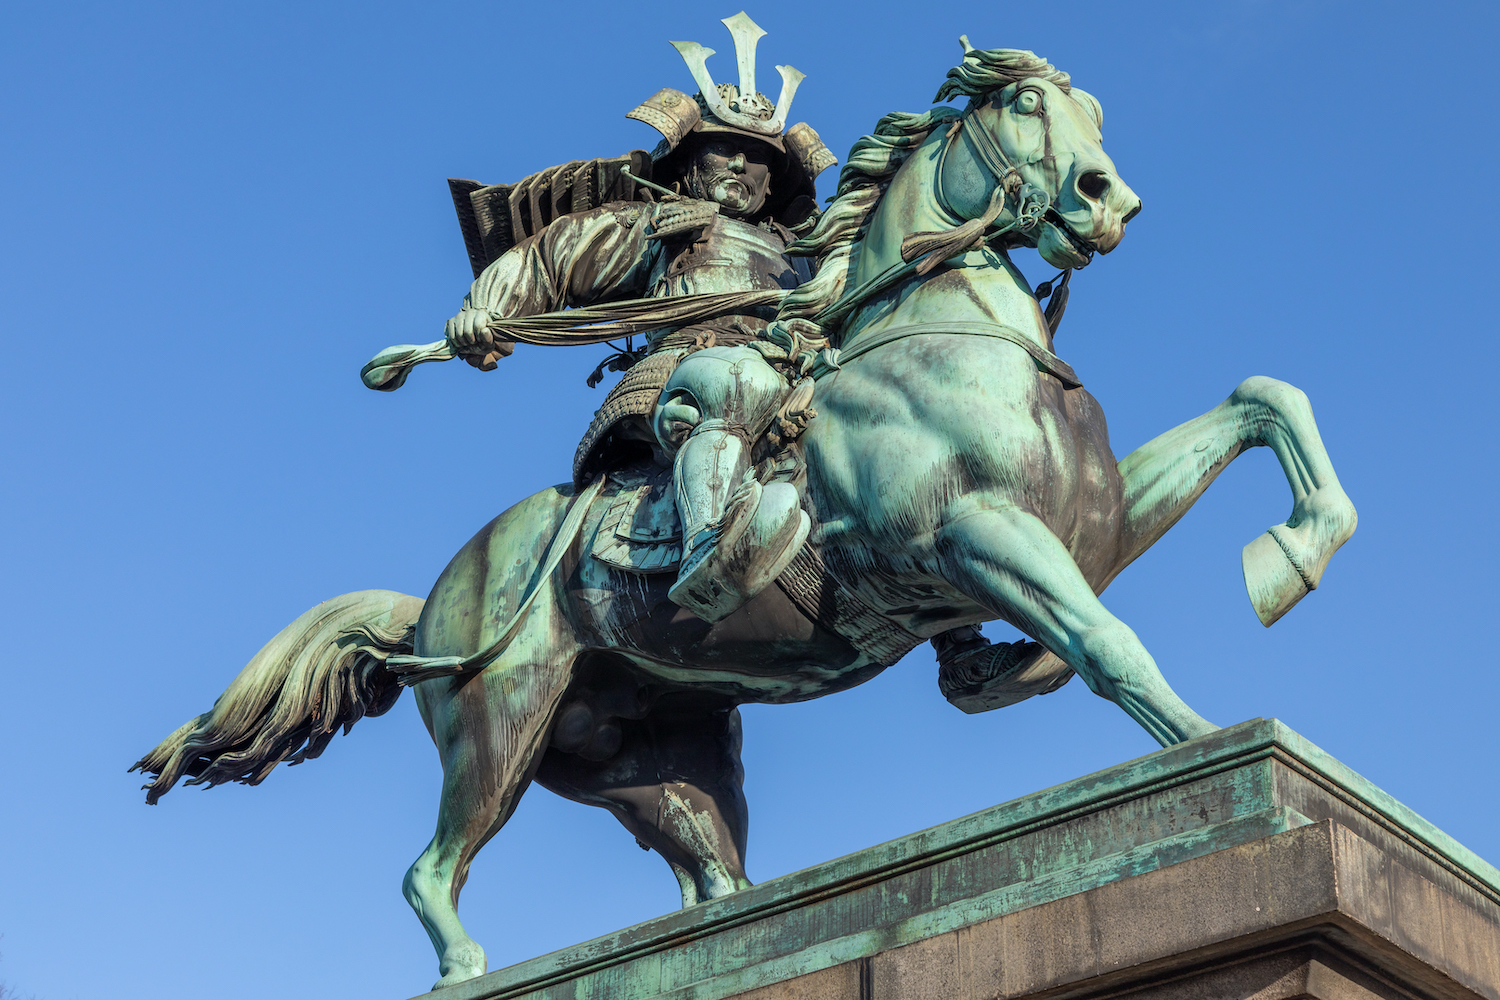 The Bronze Statue of Masashige Kusunoki, in front of the Imperial Palace, Tokyo. he is Kamakura Period Warlord.This statue was created before 1900.